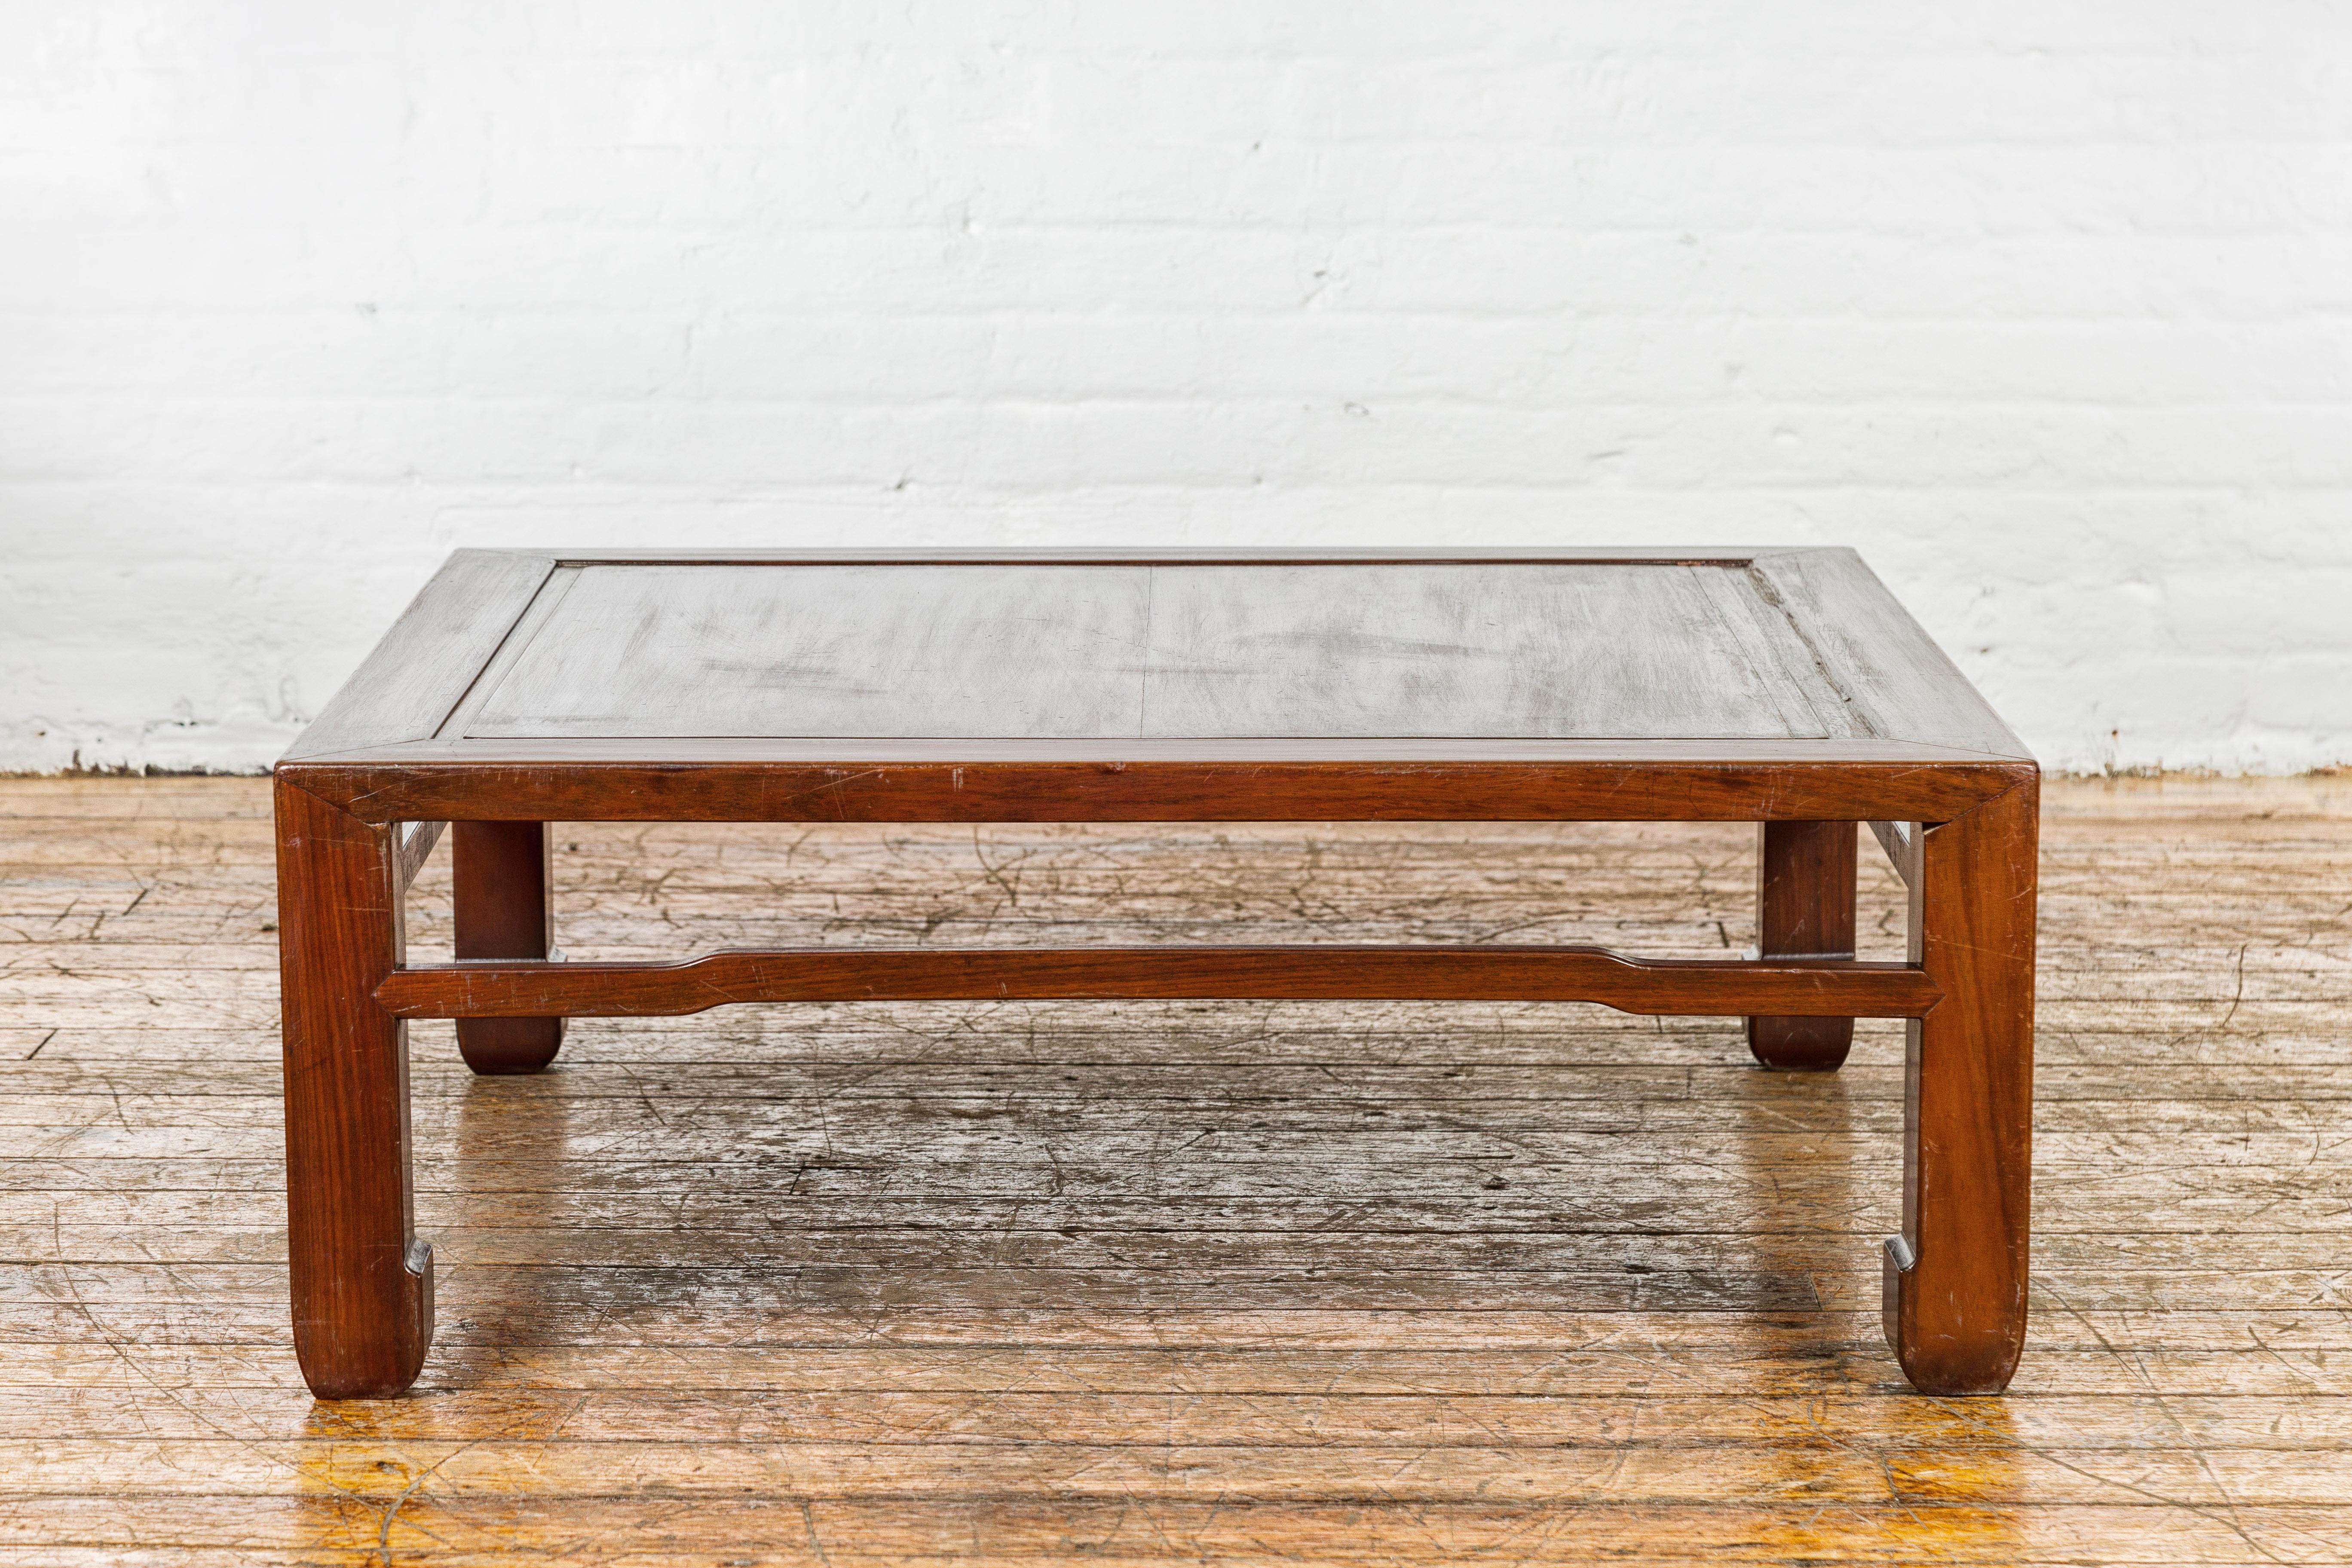 20th Century Late Qing Dynasty Square Coffee Table with Horse Hoof Legs and Stretchers For Sale